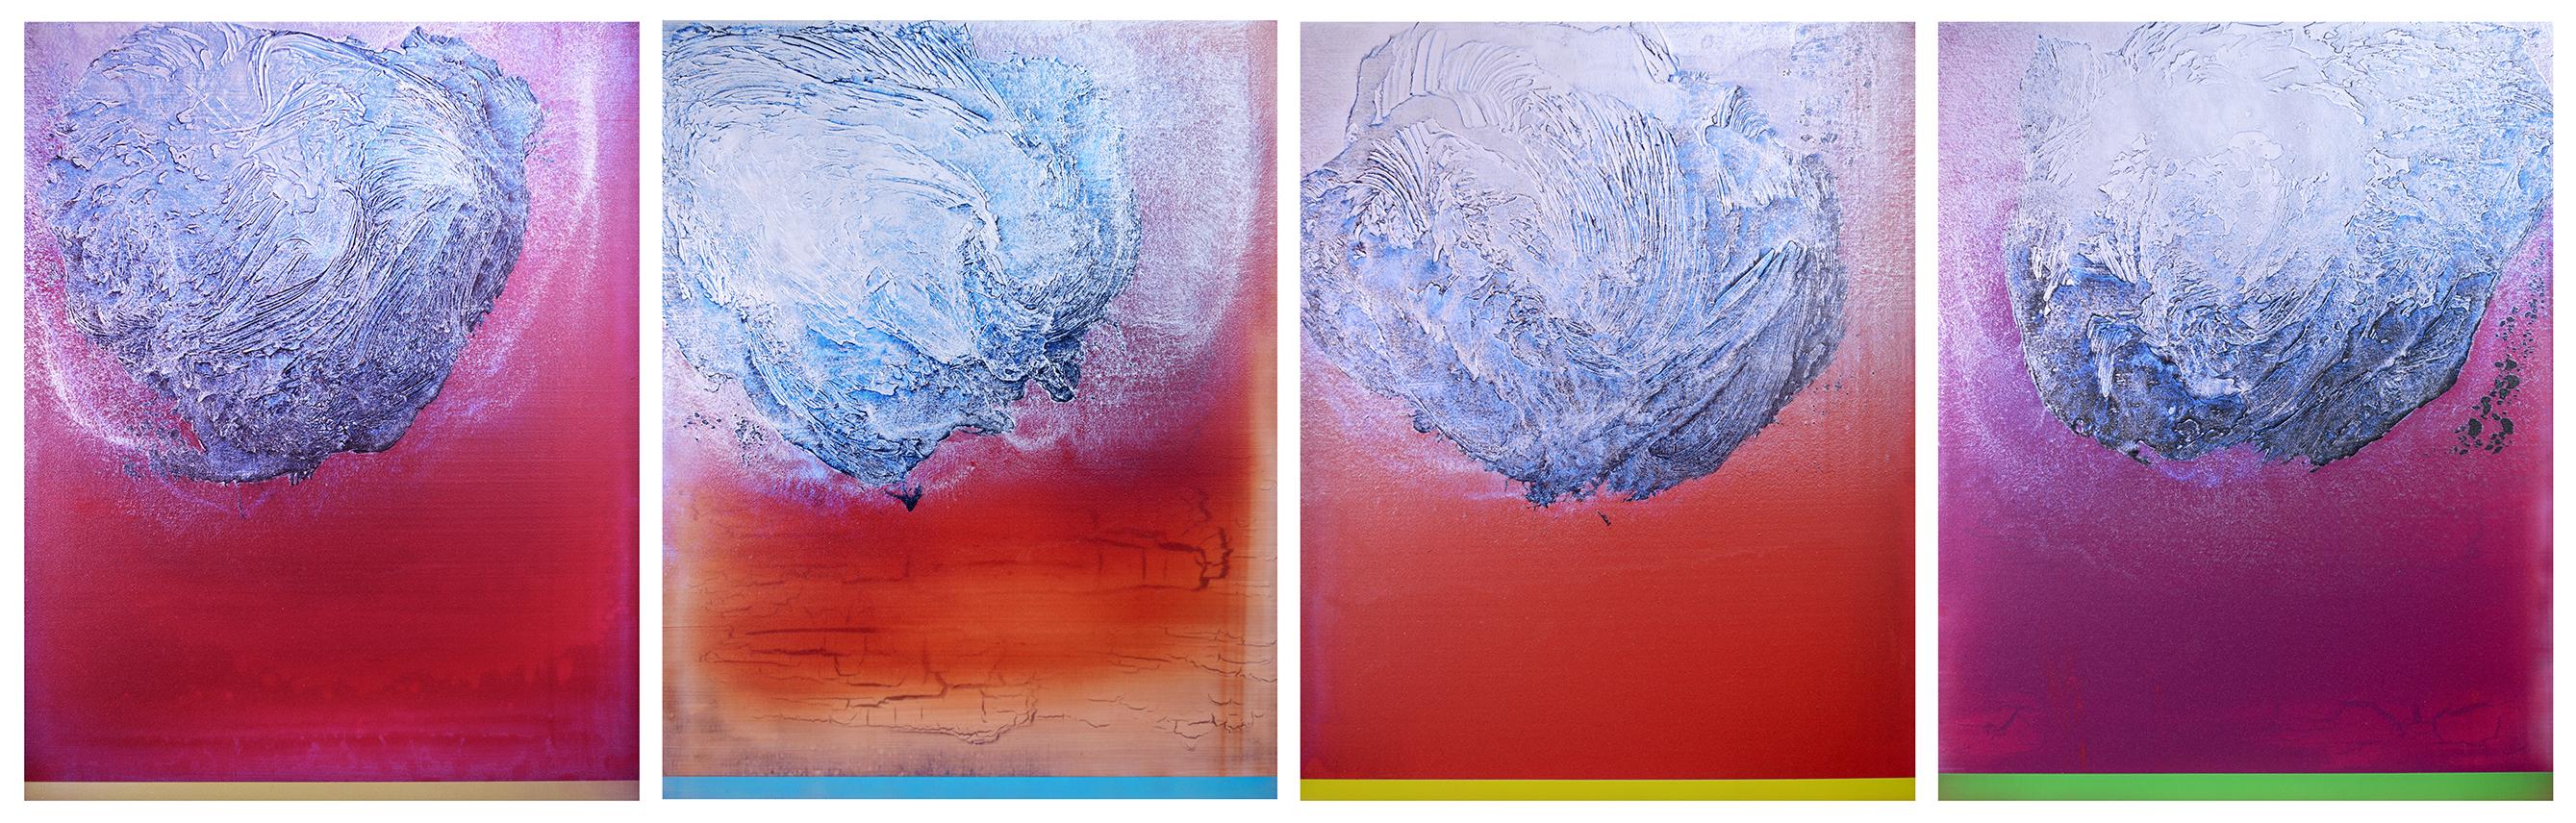 Worlds apart come together in this polyptych celebrating the power of unity. Teichert's most recent exhibition, Connectivity, features works that have a painterly line undulating through the horizon line, like the smooth, continuous, oscillations of